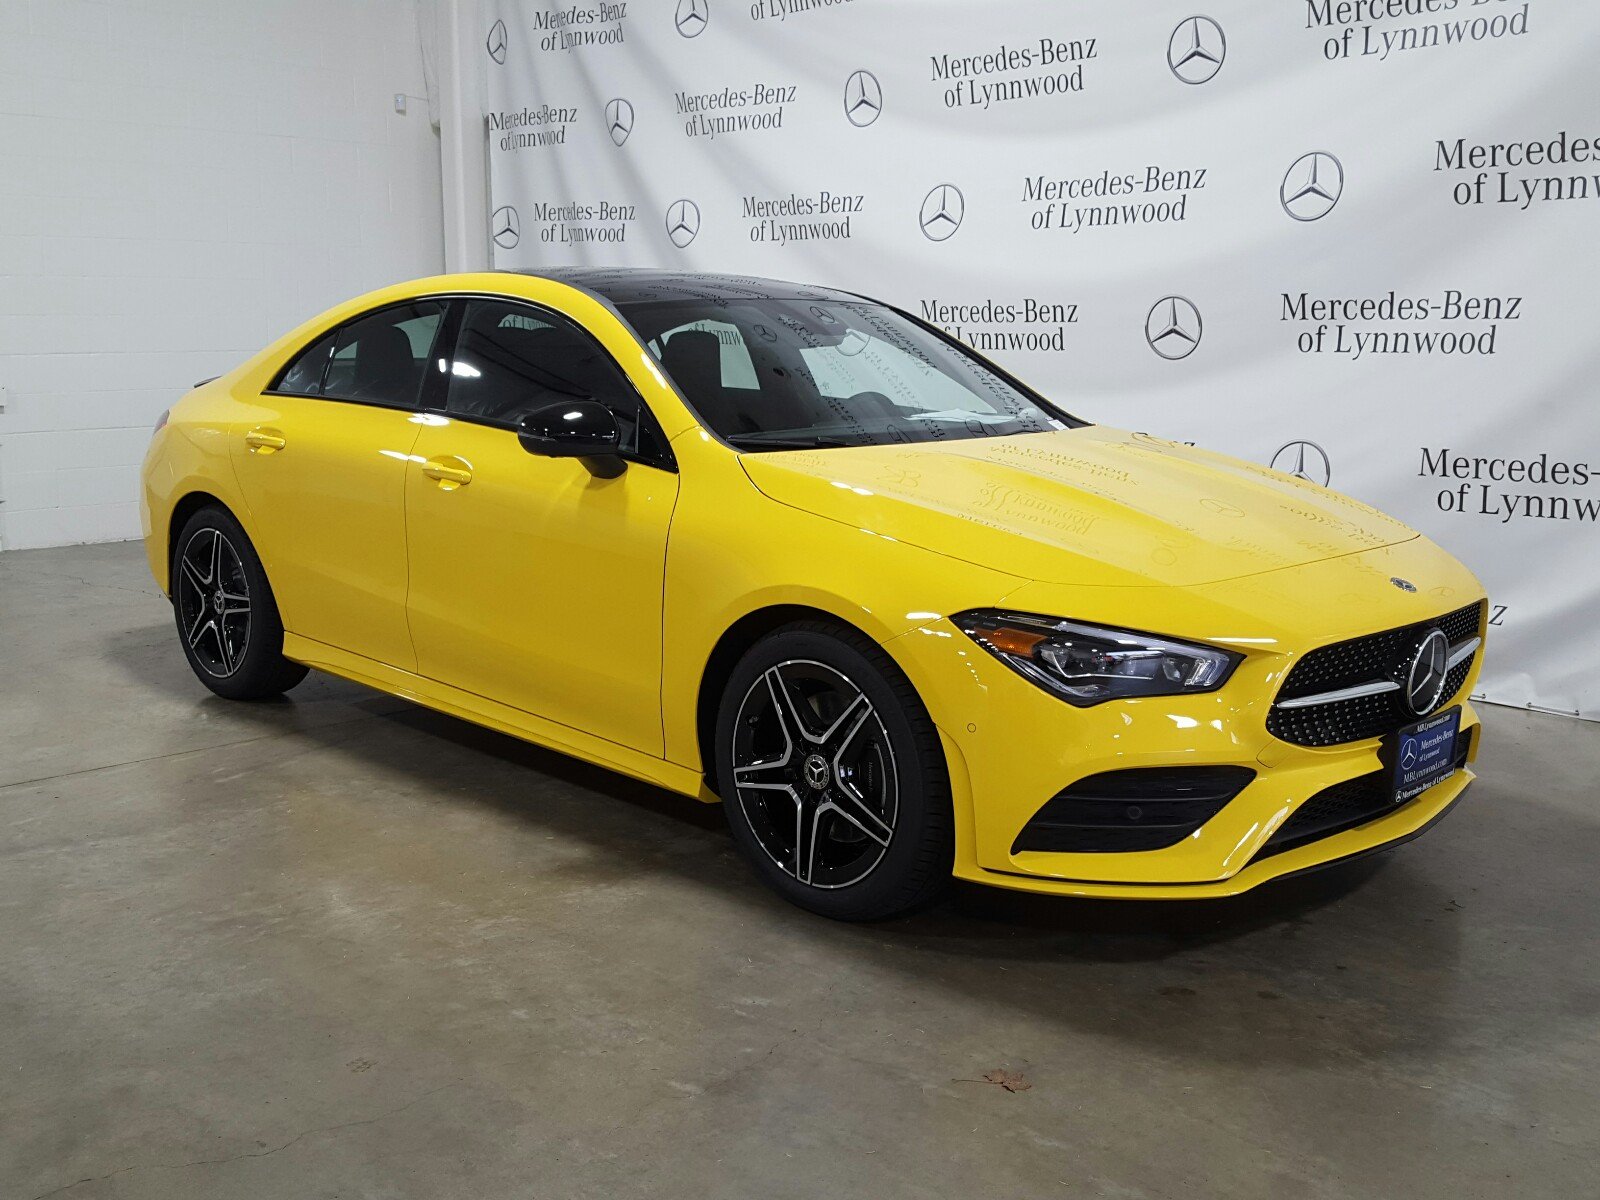 New 2020 Mercedes Benz Cla 250 4matic Coupe